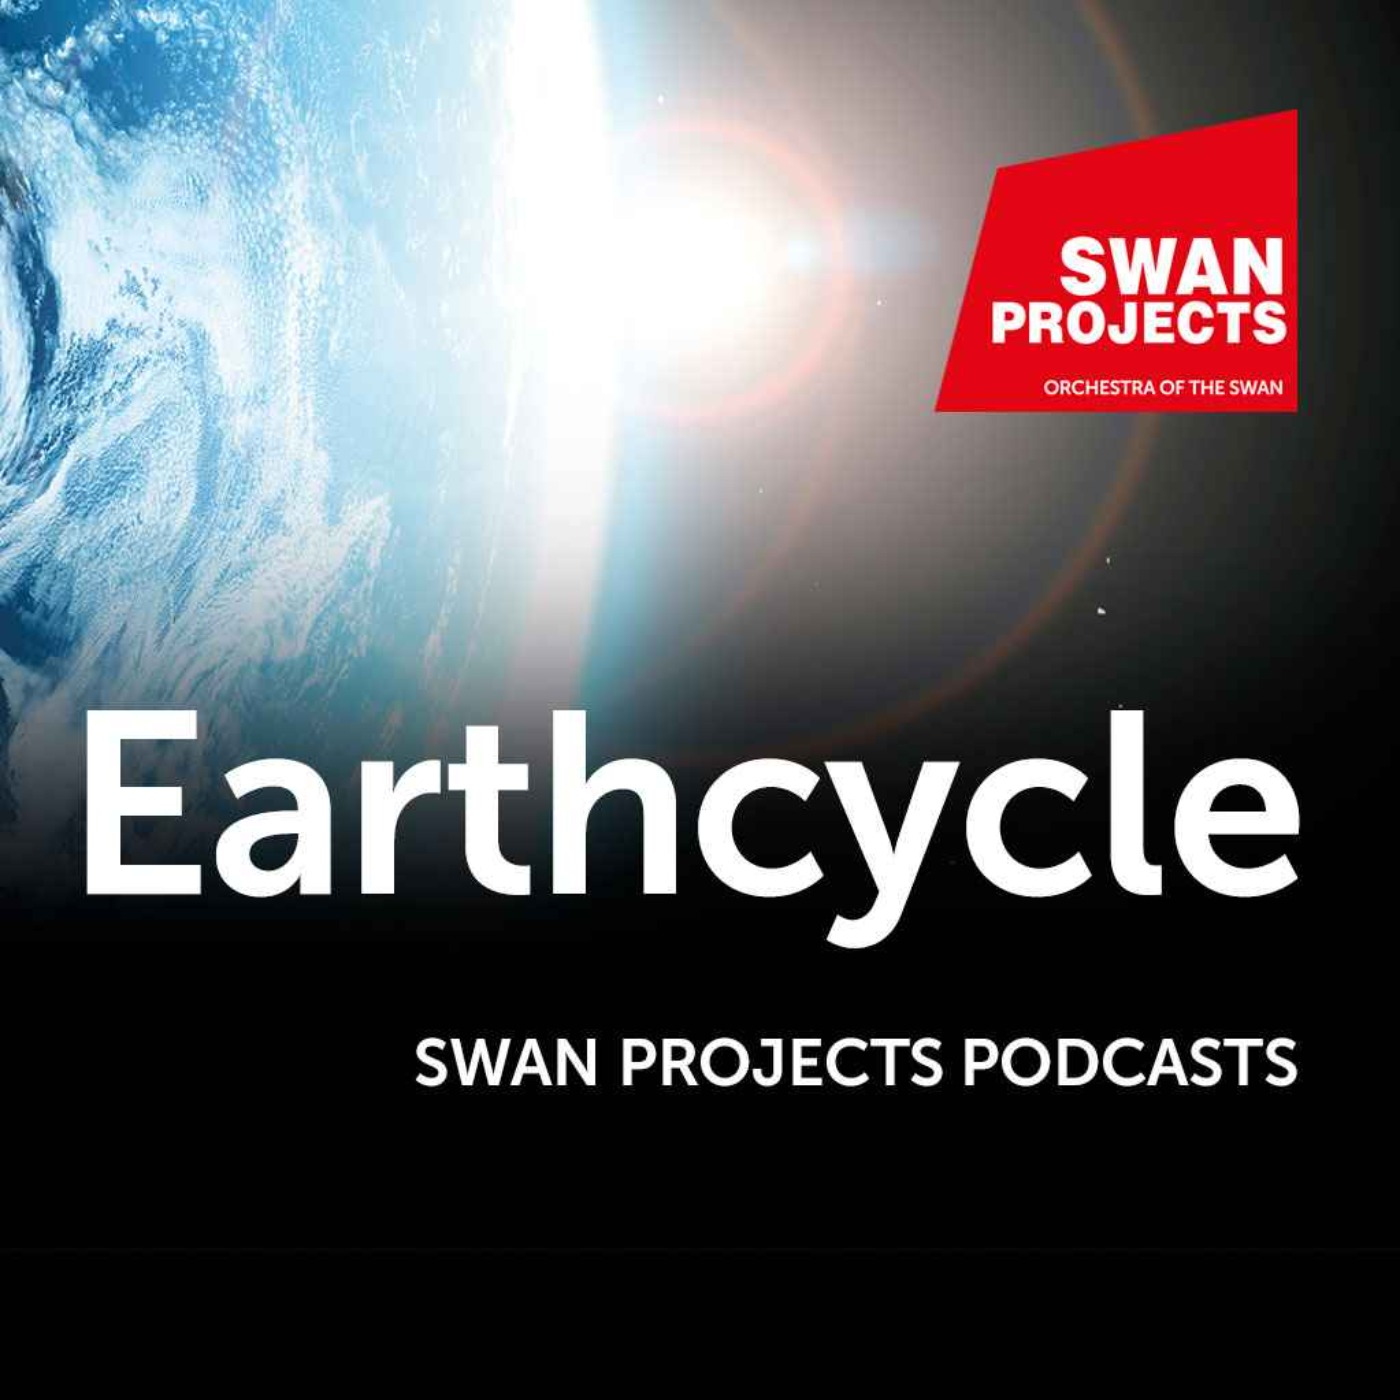 Earthcycle - A Swan Project Podcast with Madeleine Finlay Part 2